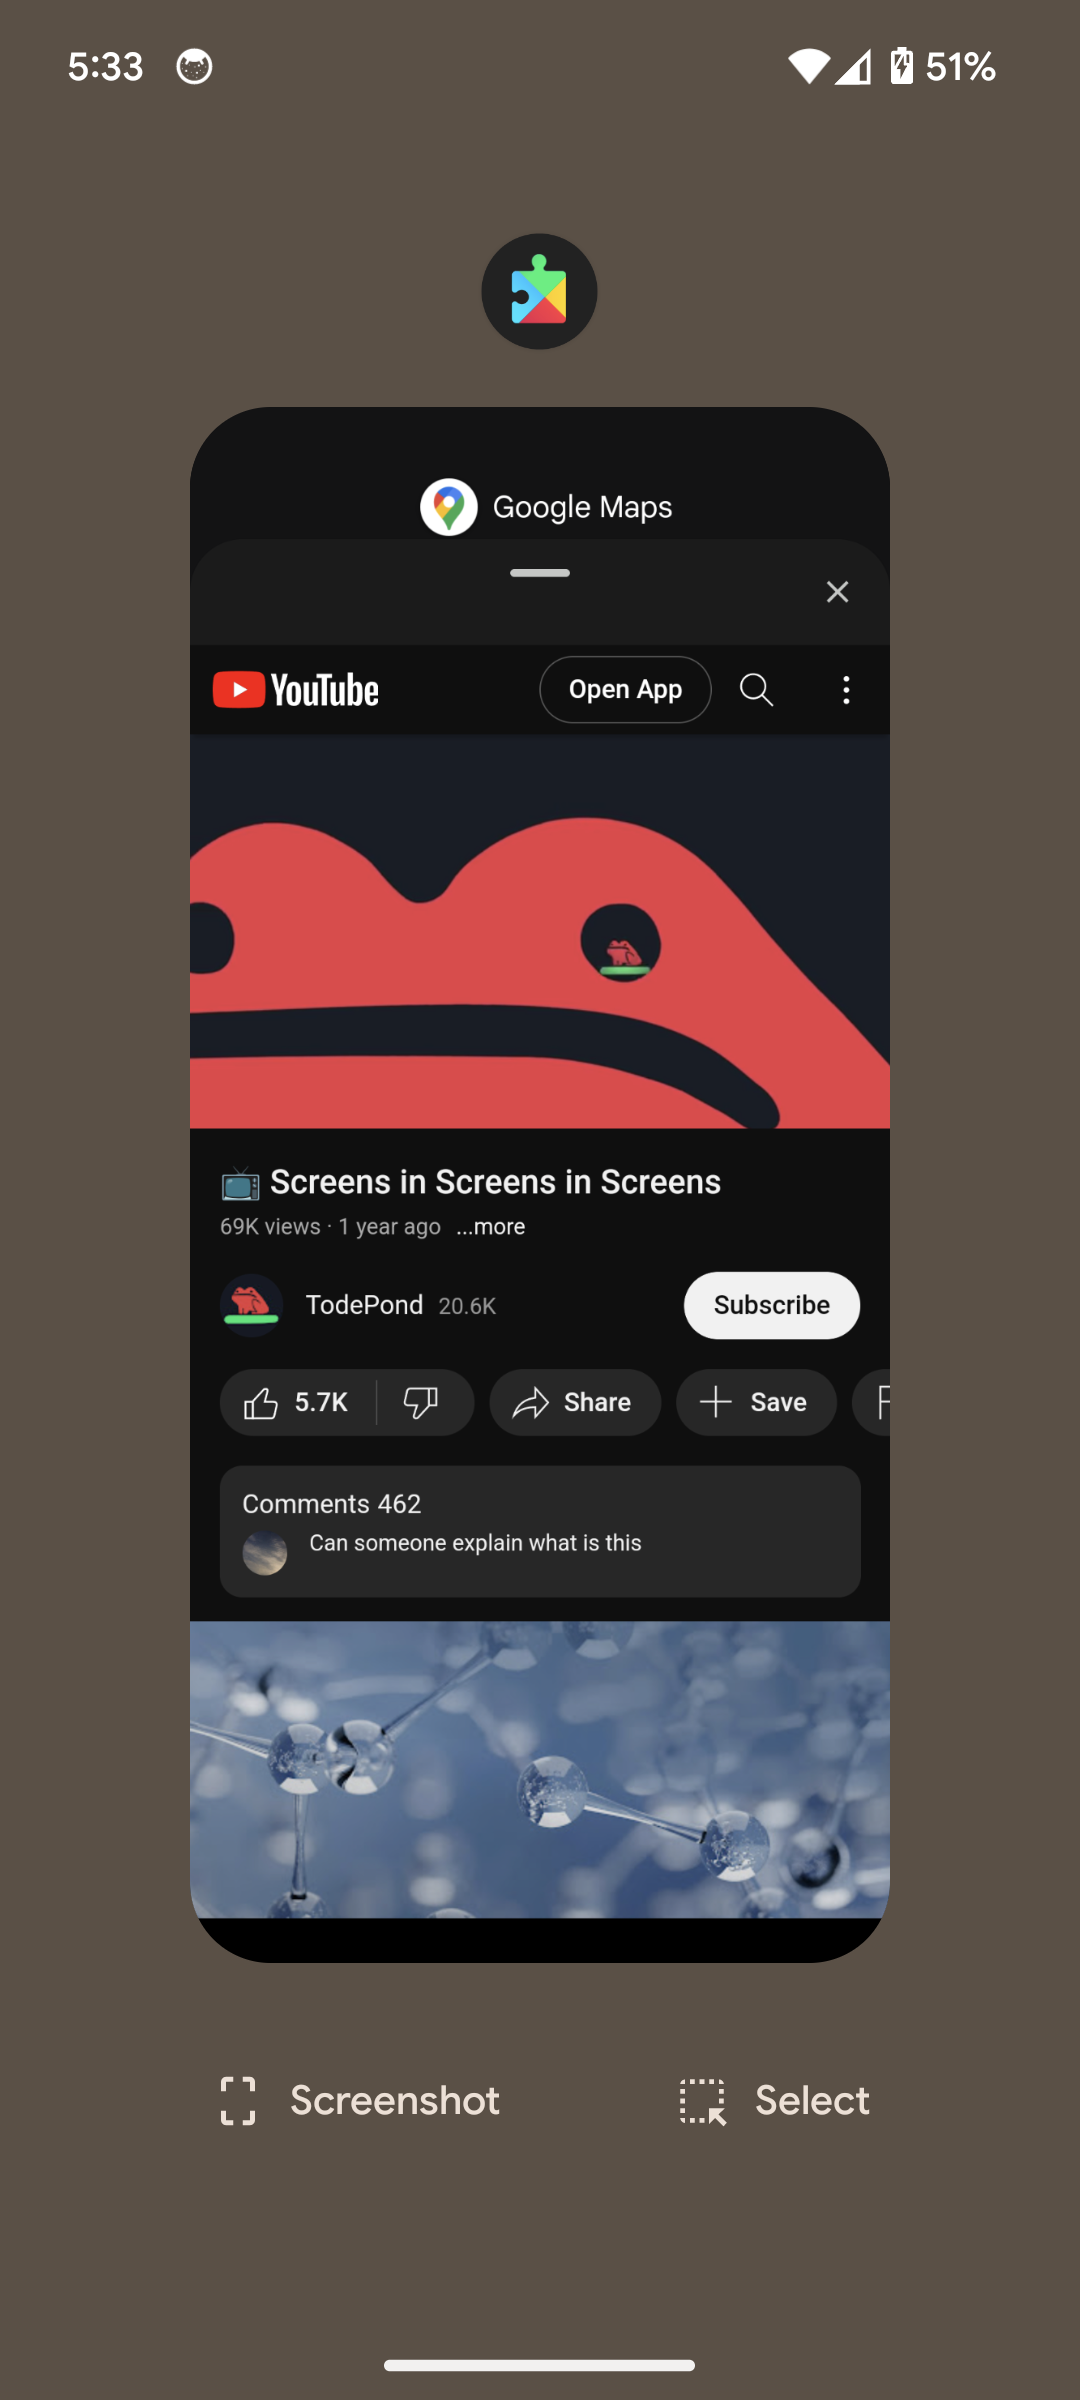 Todepond video in google play services app